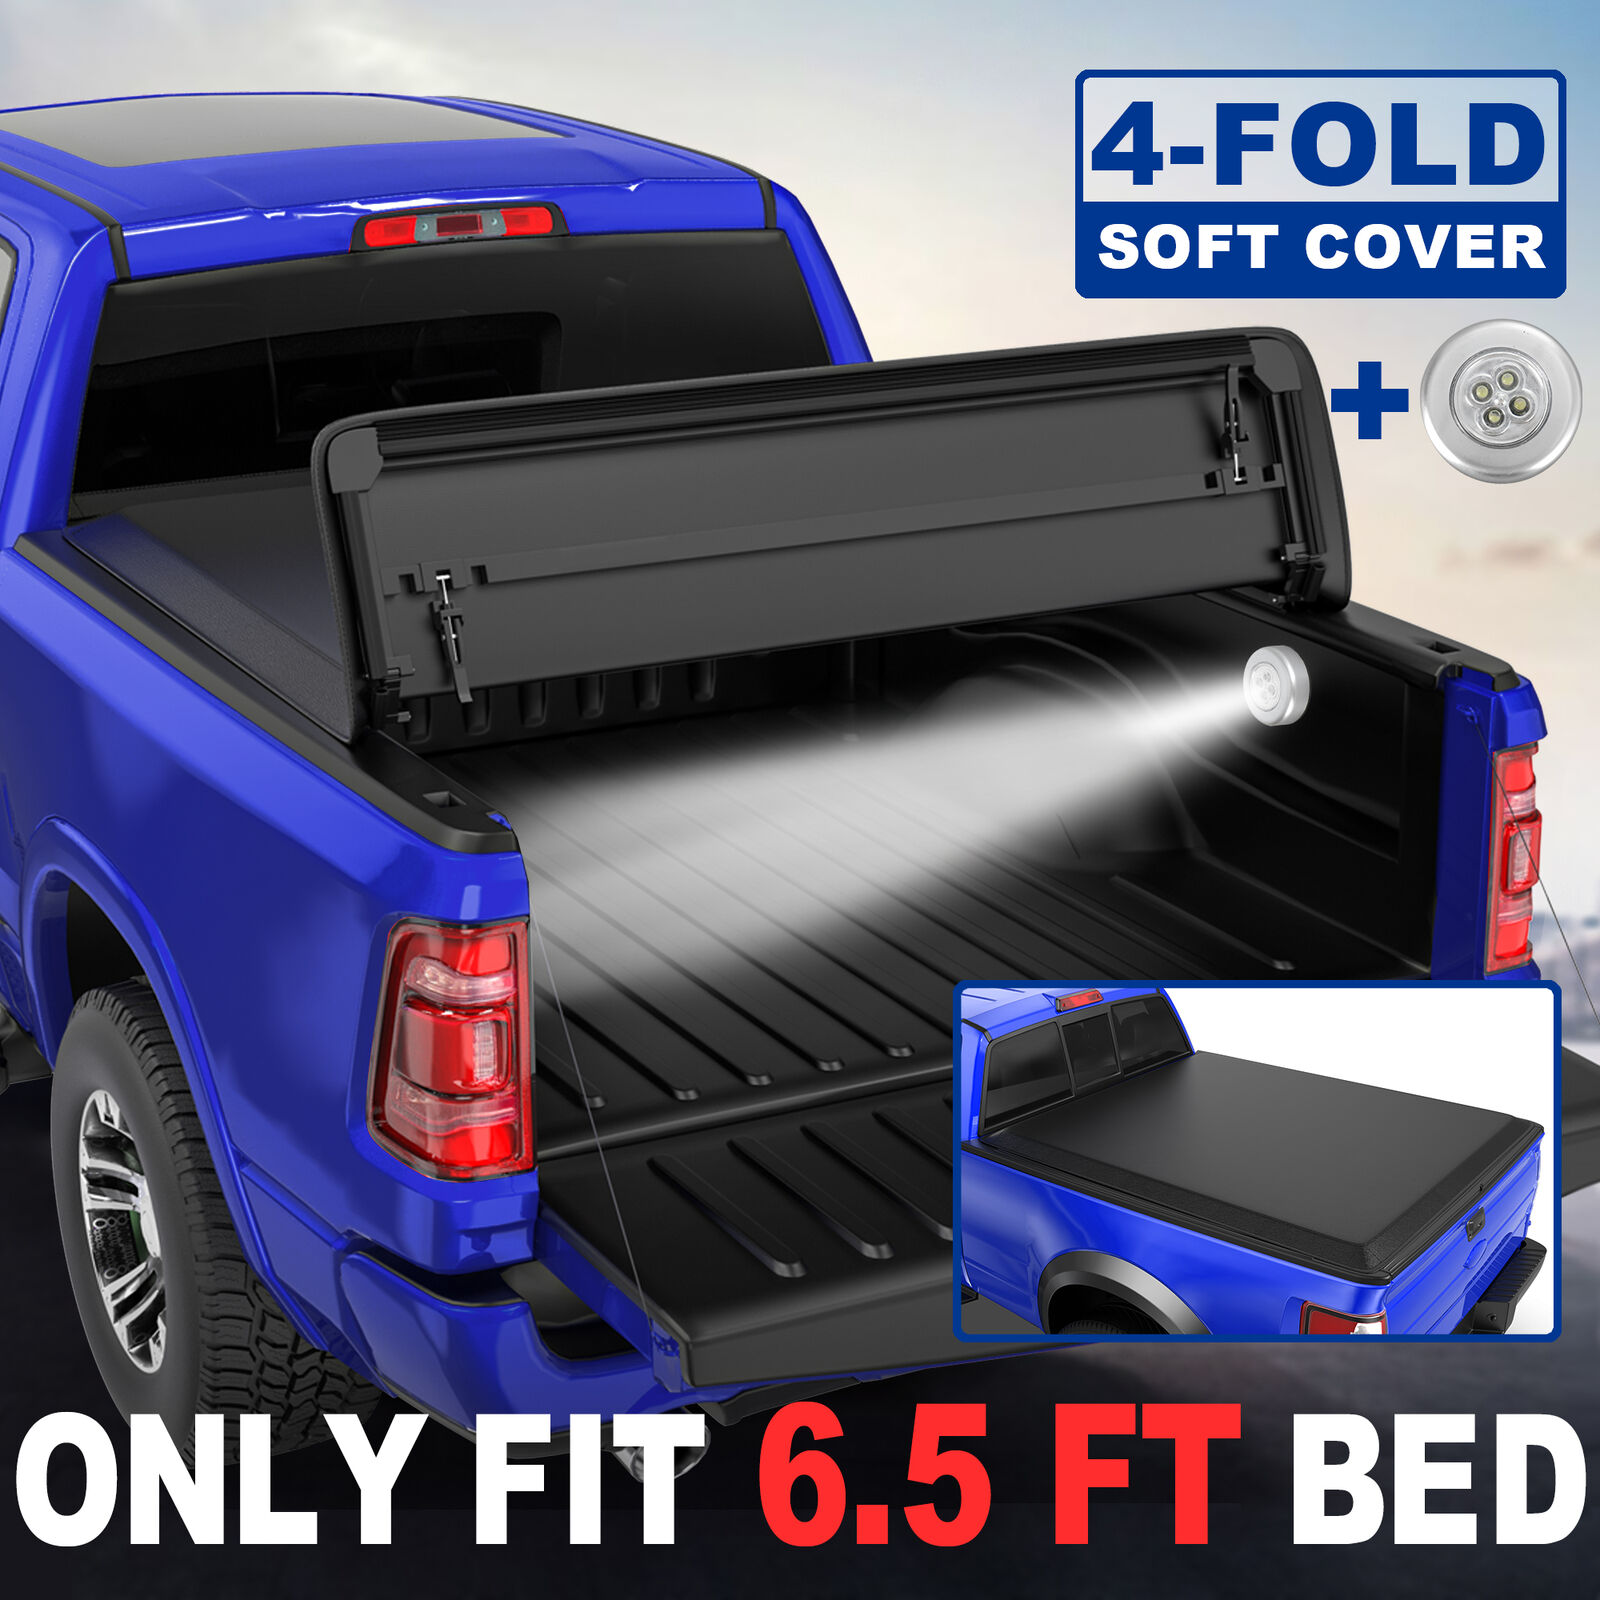 6.5 Feet Bed 4 Fold Soft Truck Tonneau Cover For 2009-2014 Ford F150 w/Led Lamp